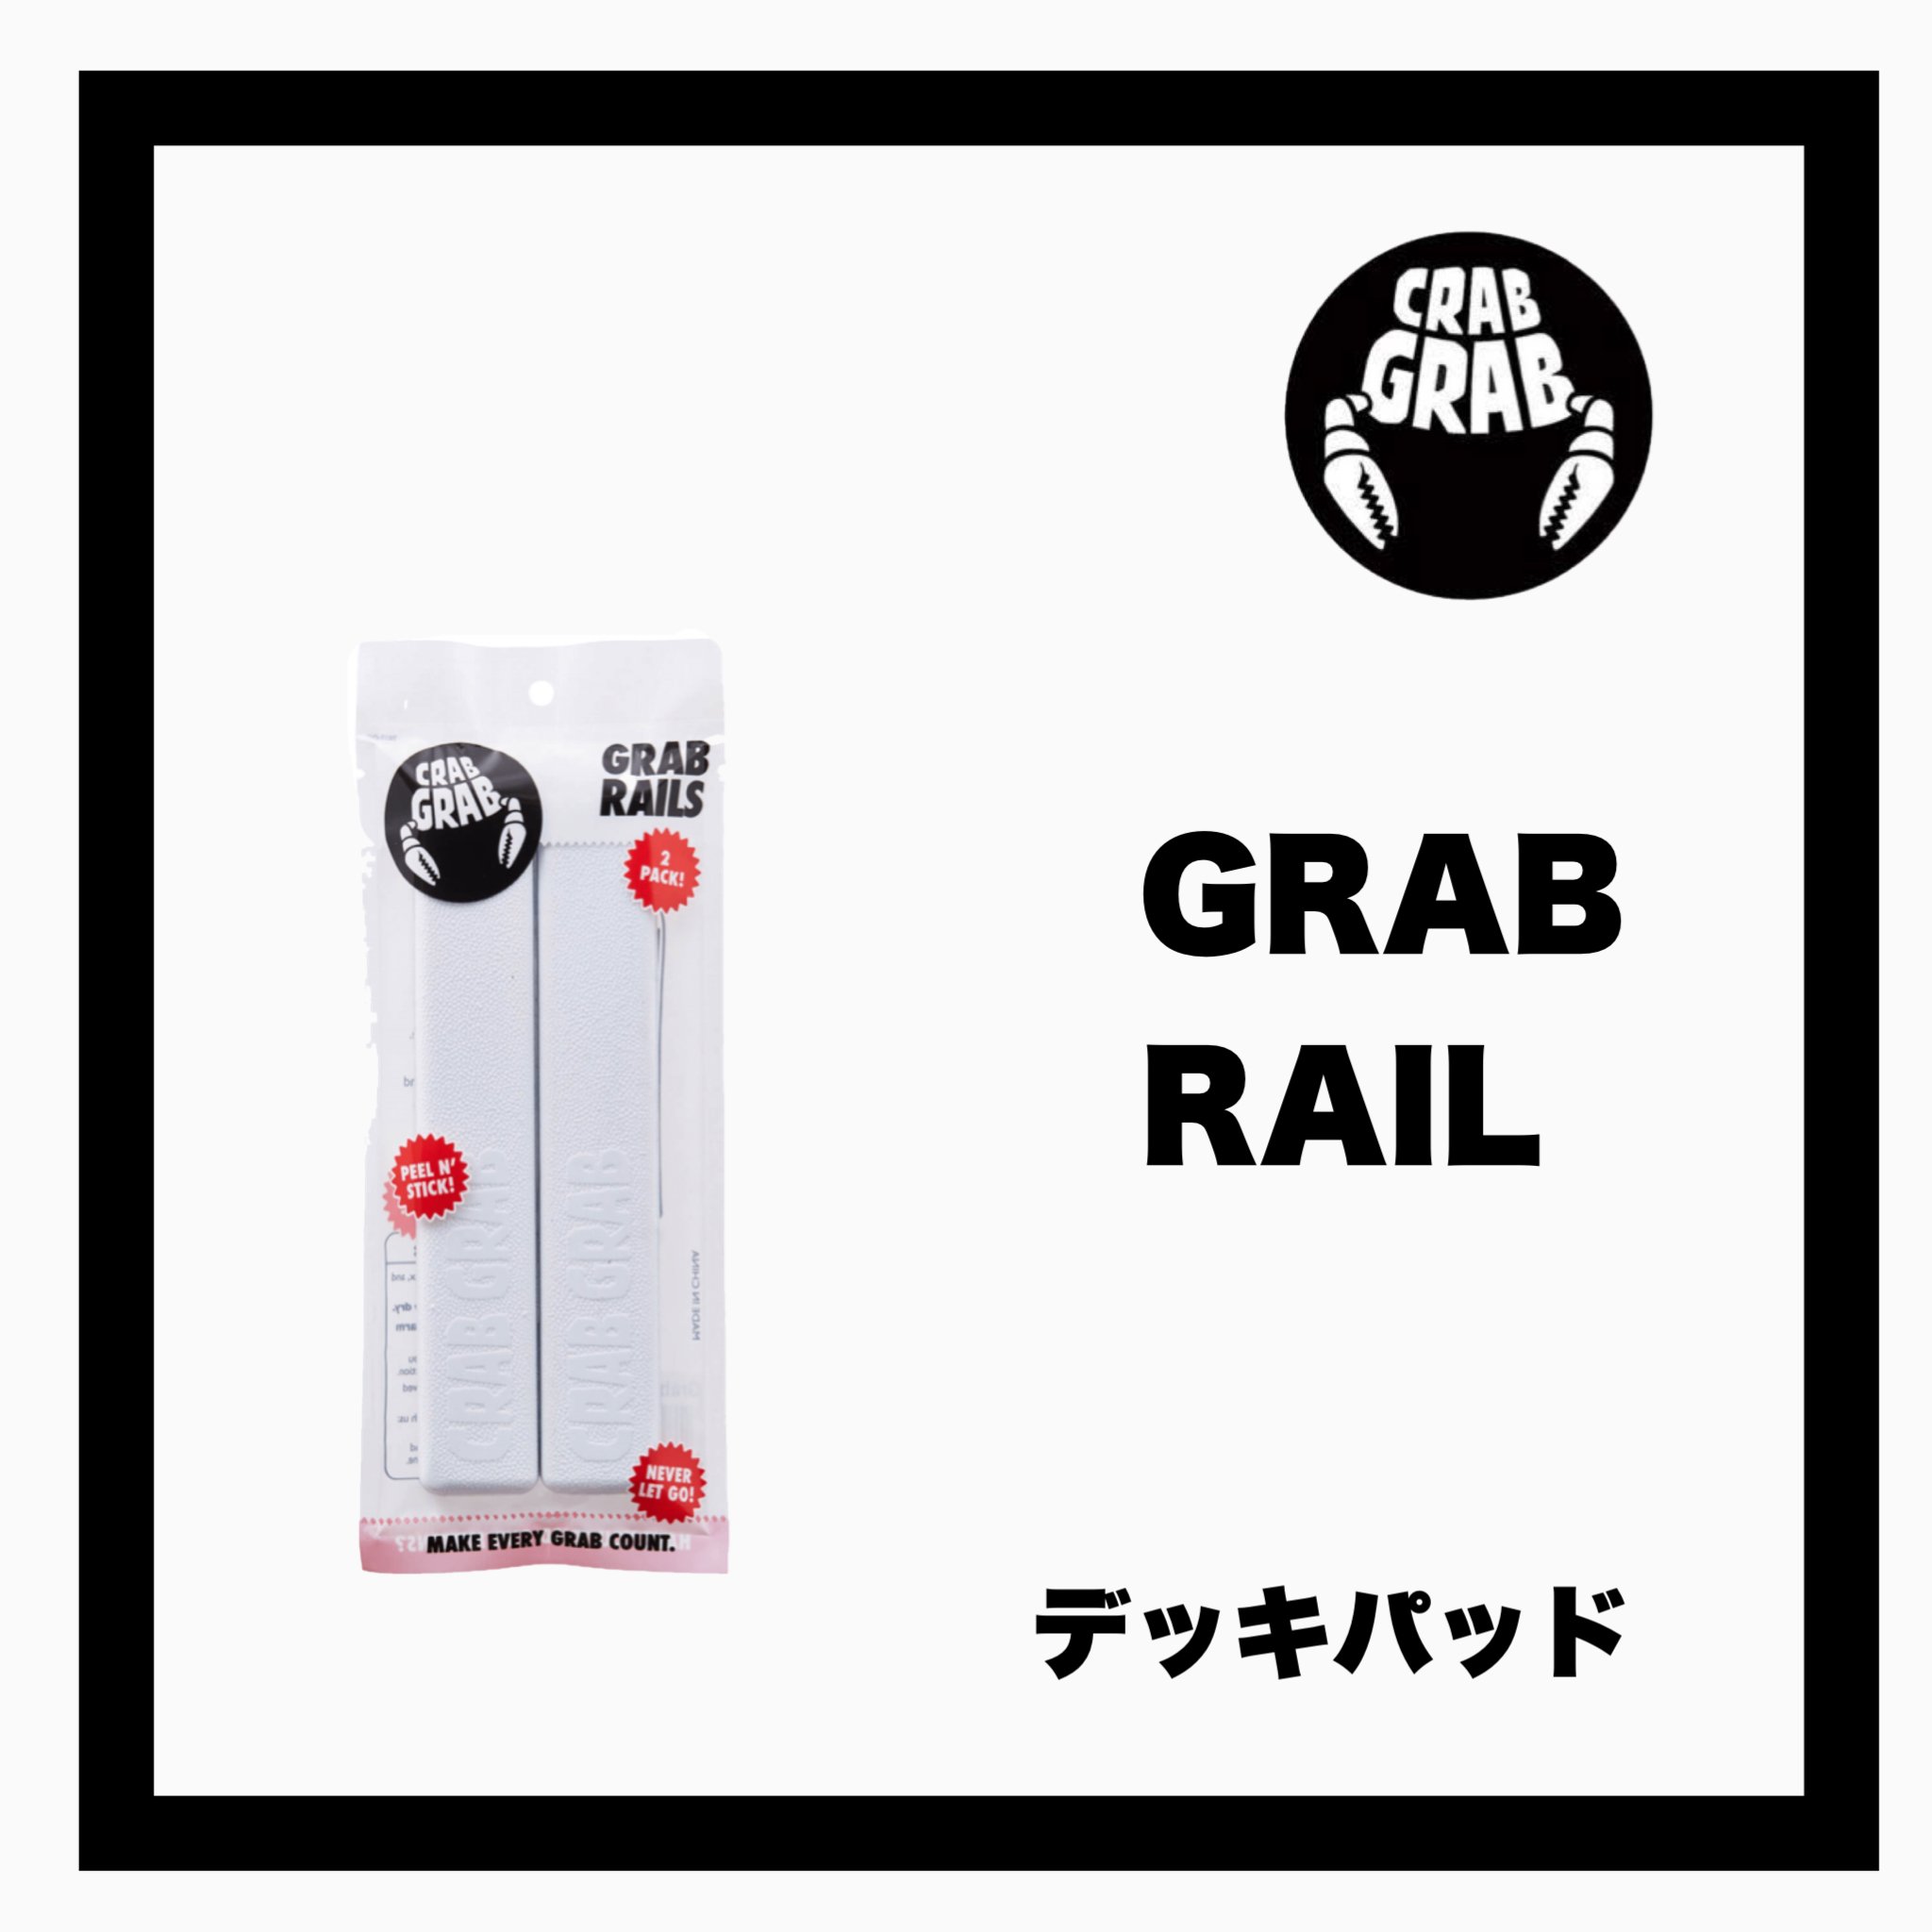 <img class='new_mark_img1' src='https://img.shop-pro.jp/img/new/icons14.gif' style='border:none;display:inline;margin:0px;padding:0px;width:auto;' />CRAB GRABGRAB RAILS